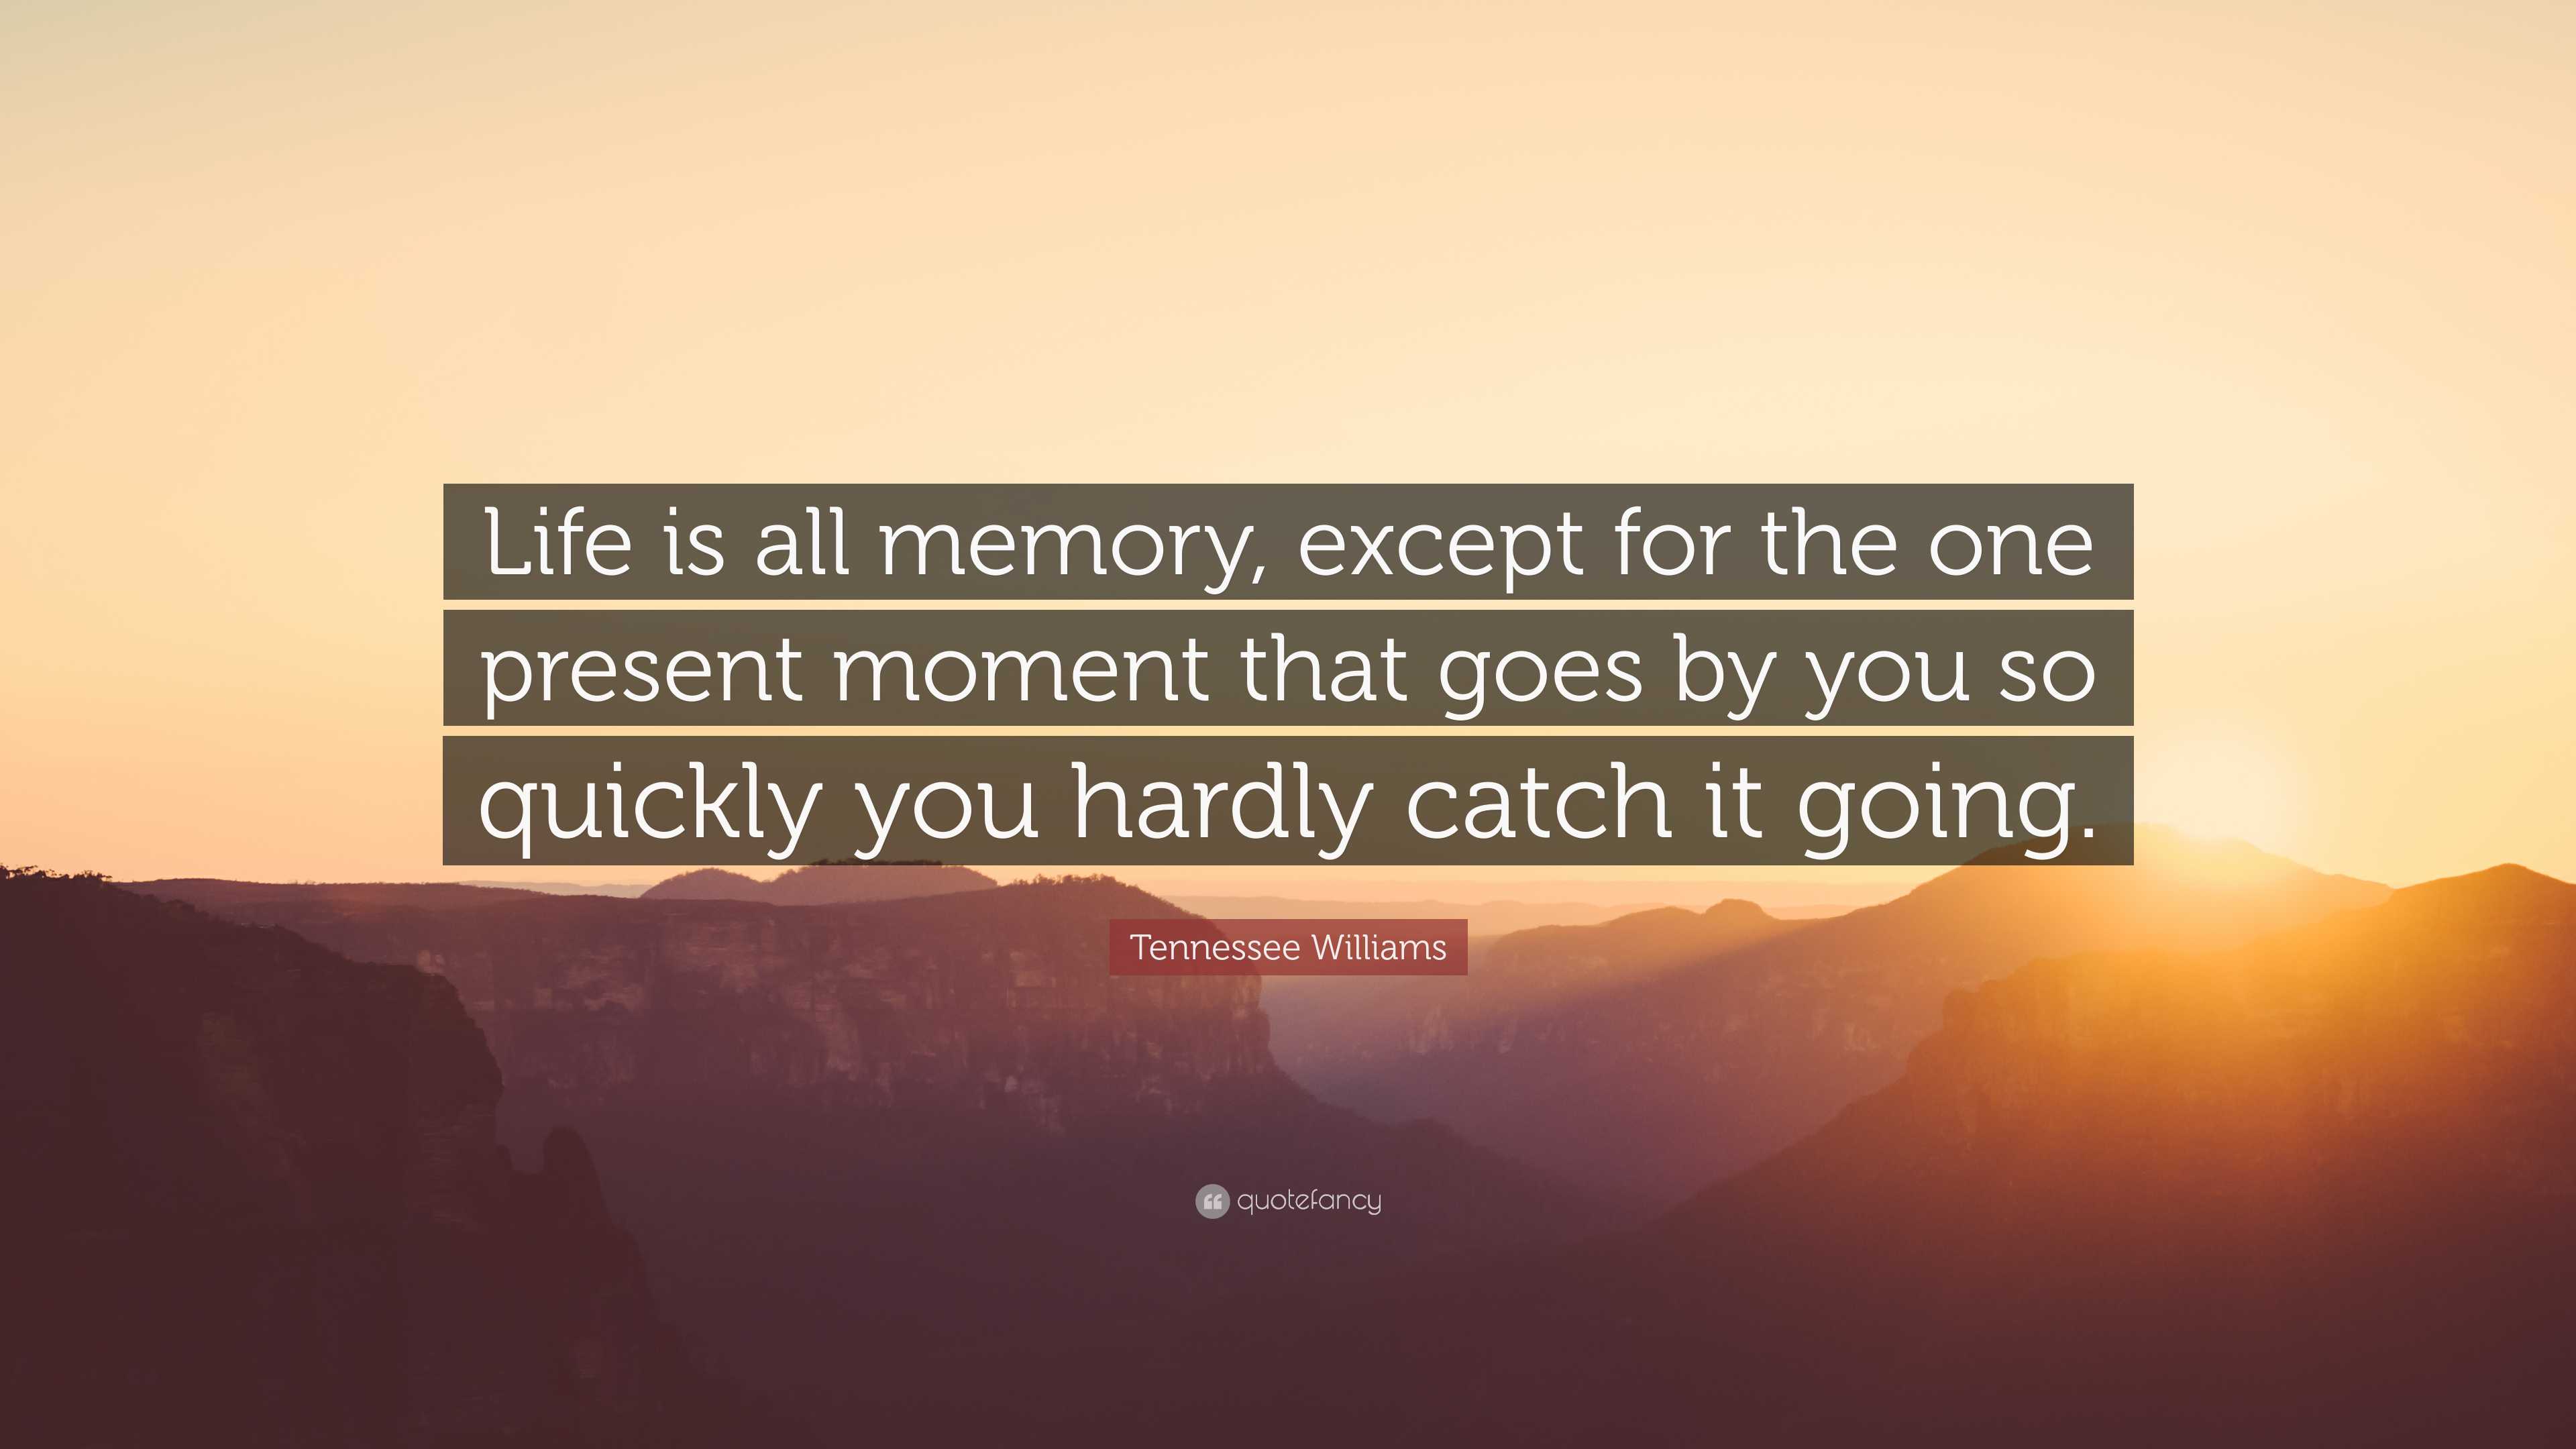 Tennessee Williams Quote: “Life is all memory, except for the one ...